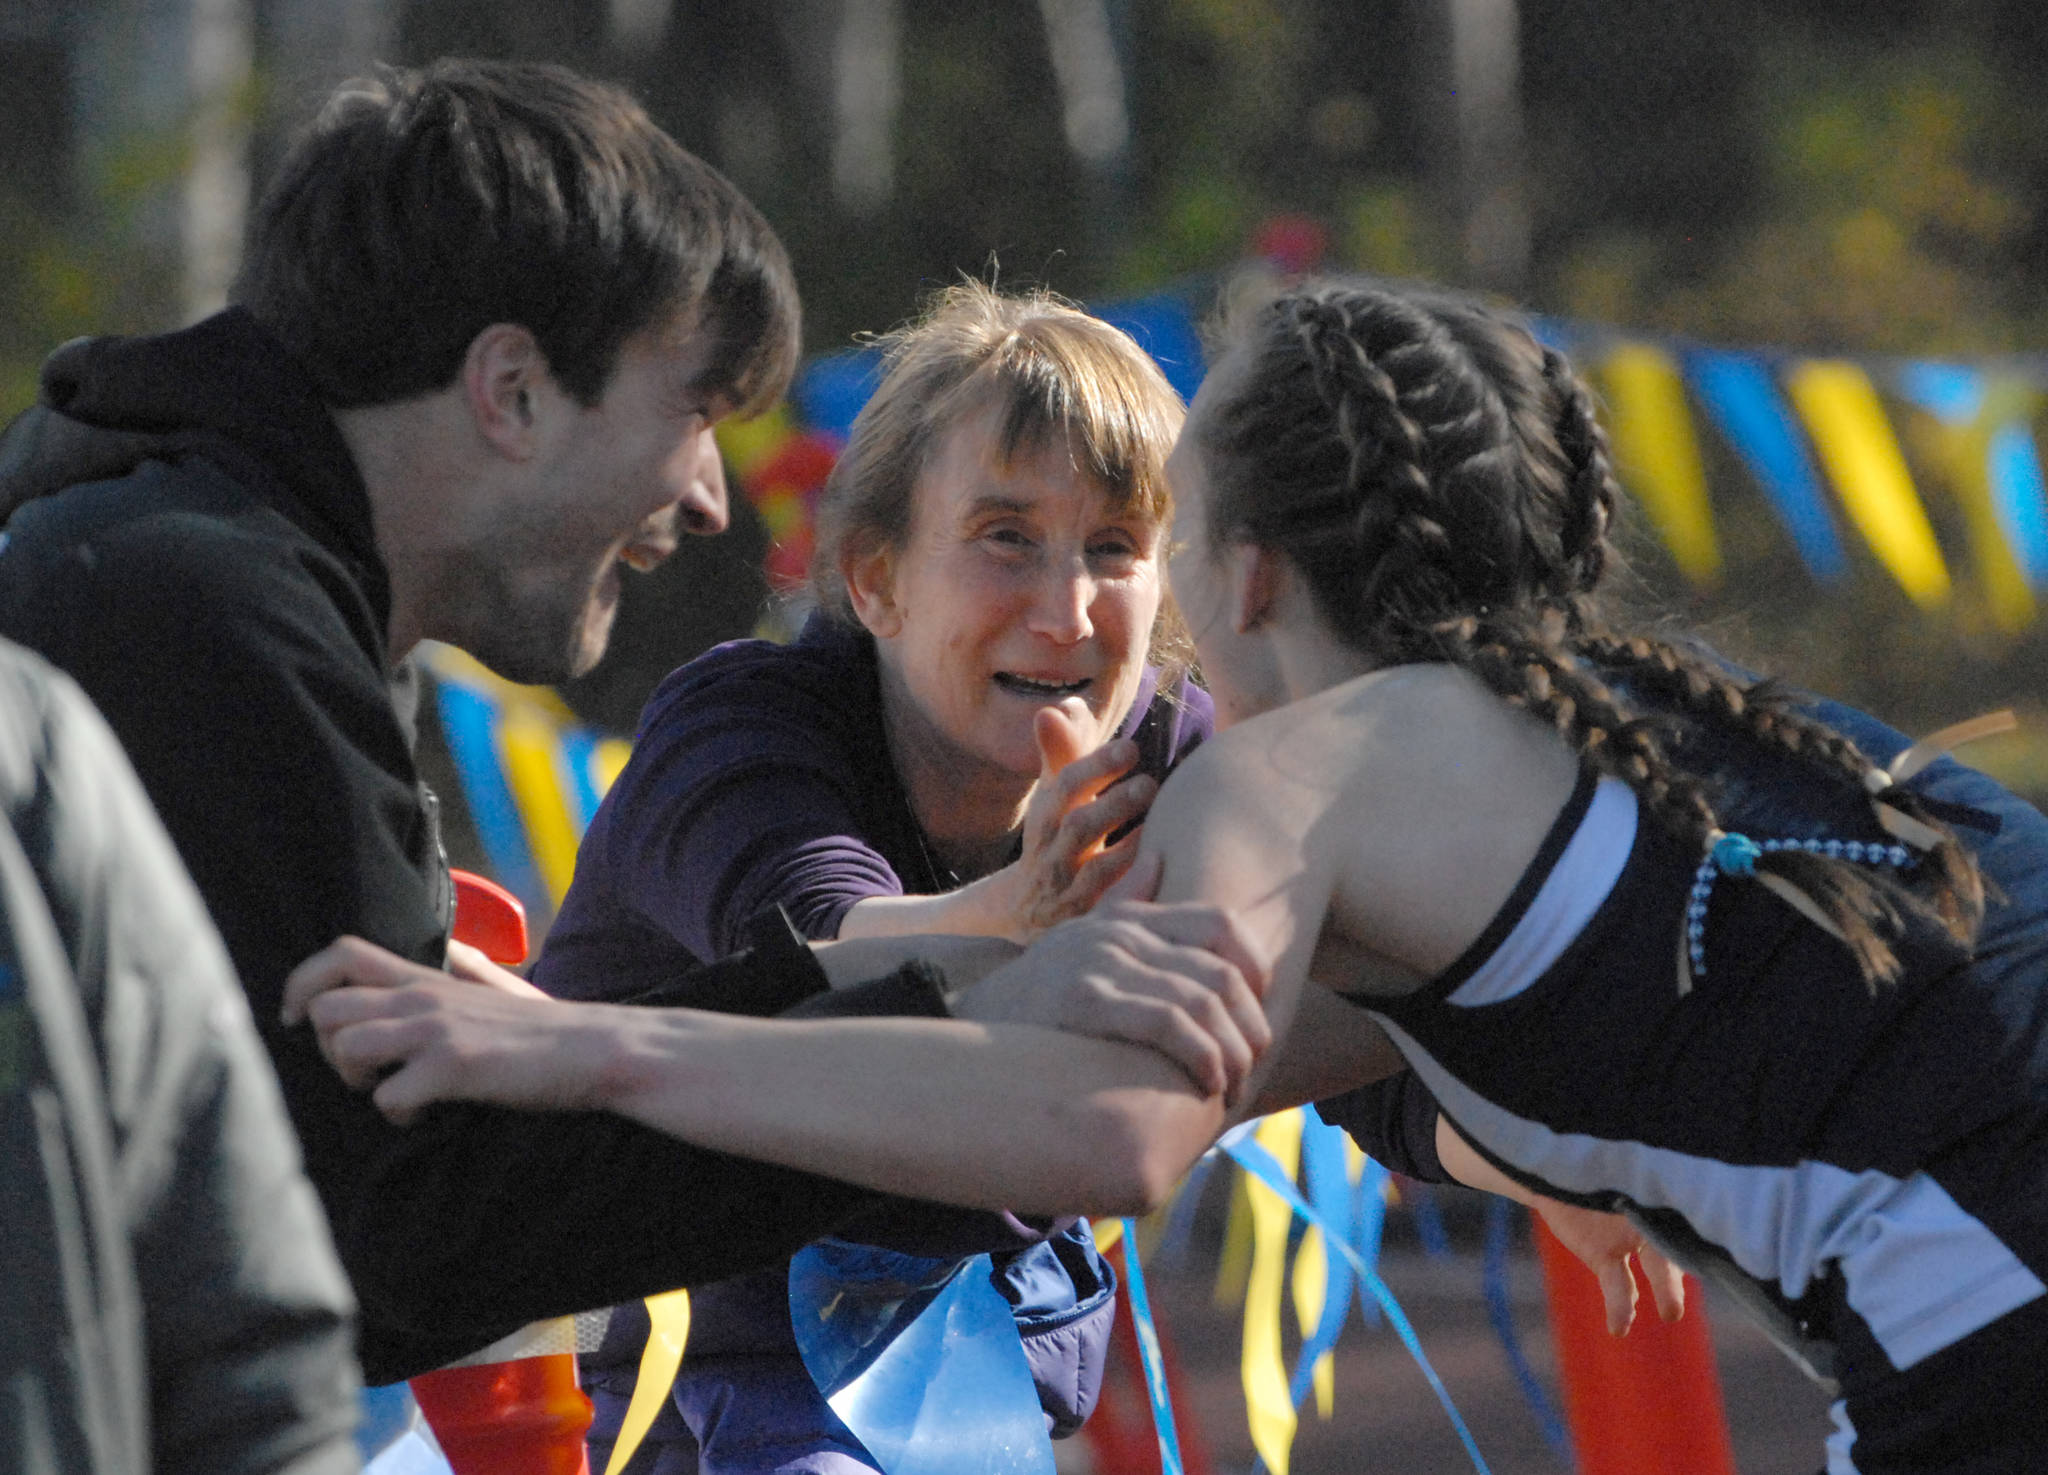 Homer freshman Autumn Daigle celebrates her victory in the Division II girls race with her mom, Anne, and brother, Ben, at the ASAA/First National Bank Alaska State Cross Country Championships on Saturday, Sept. 30, 2017 at Bartlett High School in Anchorage, Alaska. (Photo by Matt Tunseth/Chugiak-Eagle River Star)